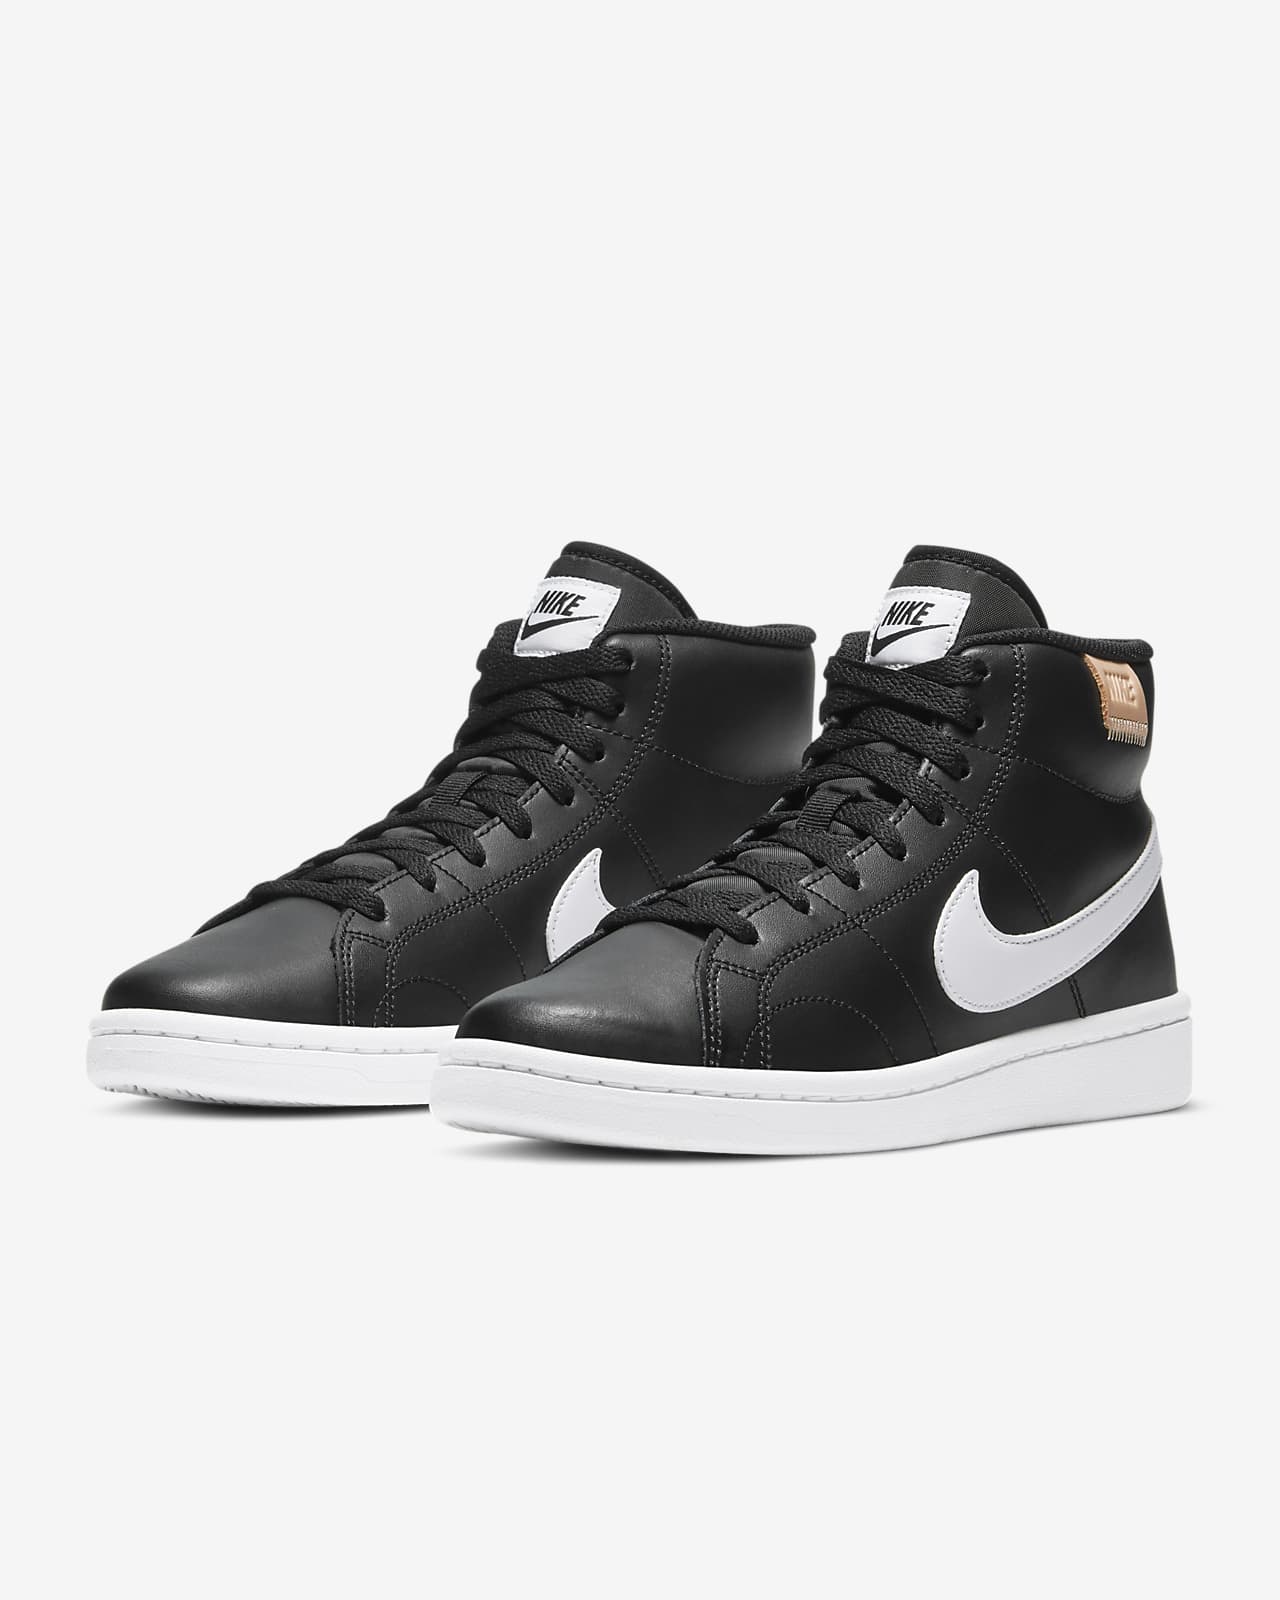 court royale mid sneaker